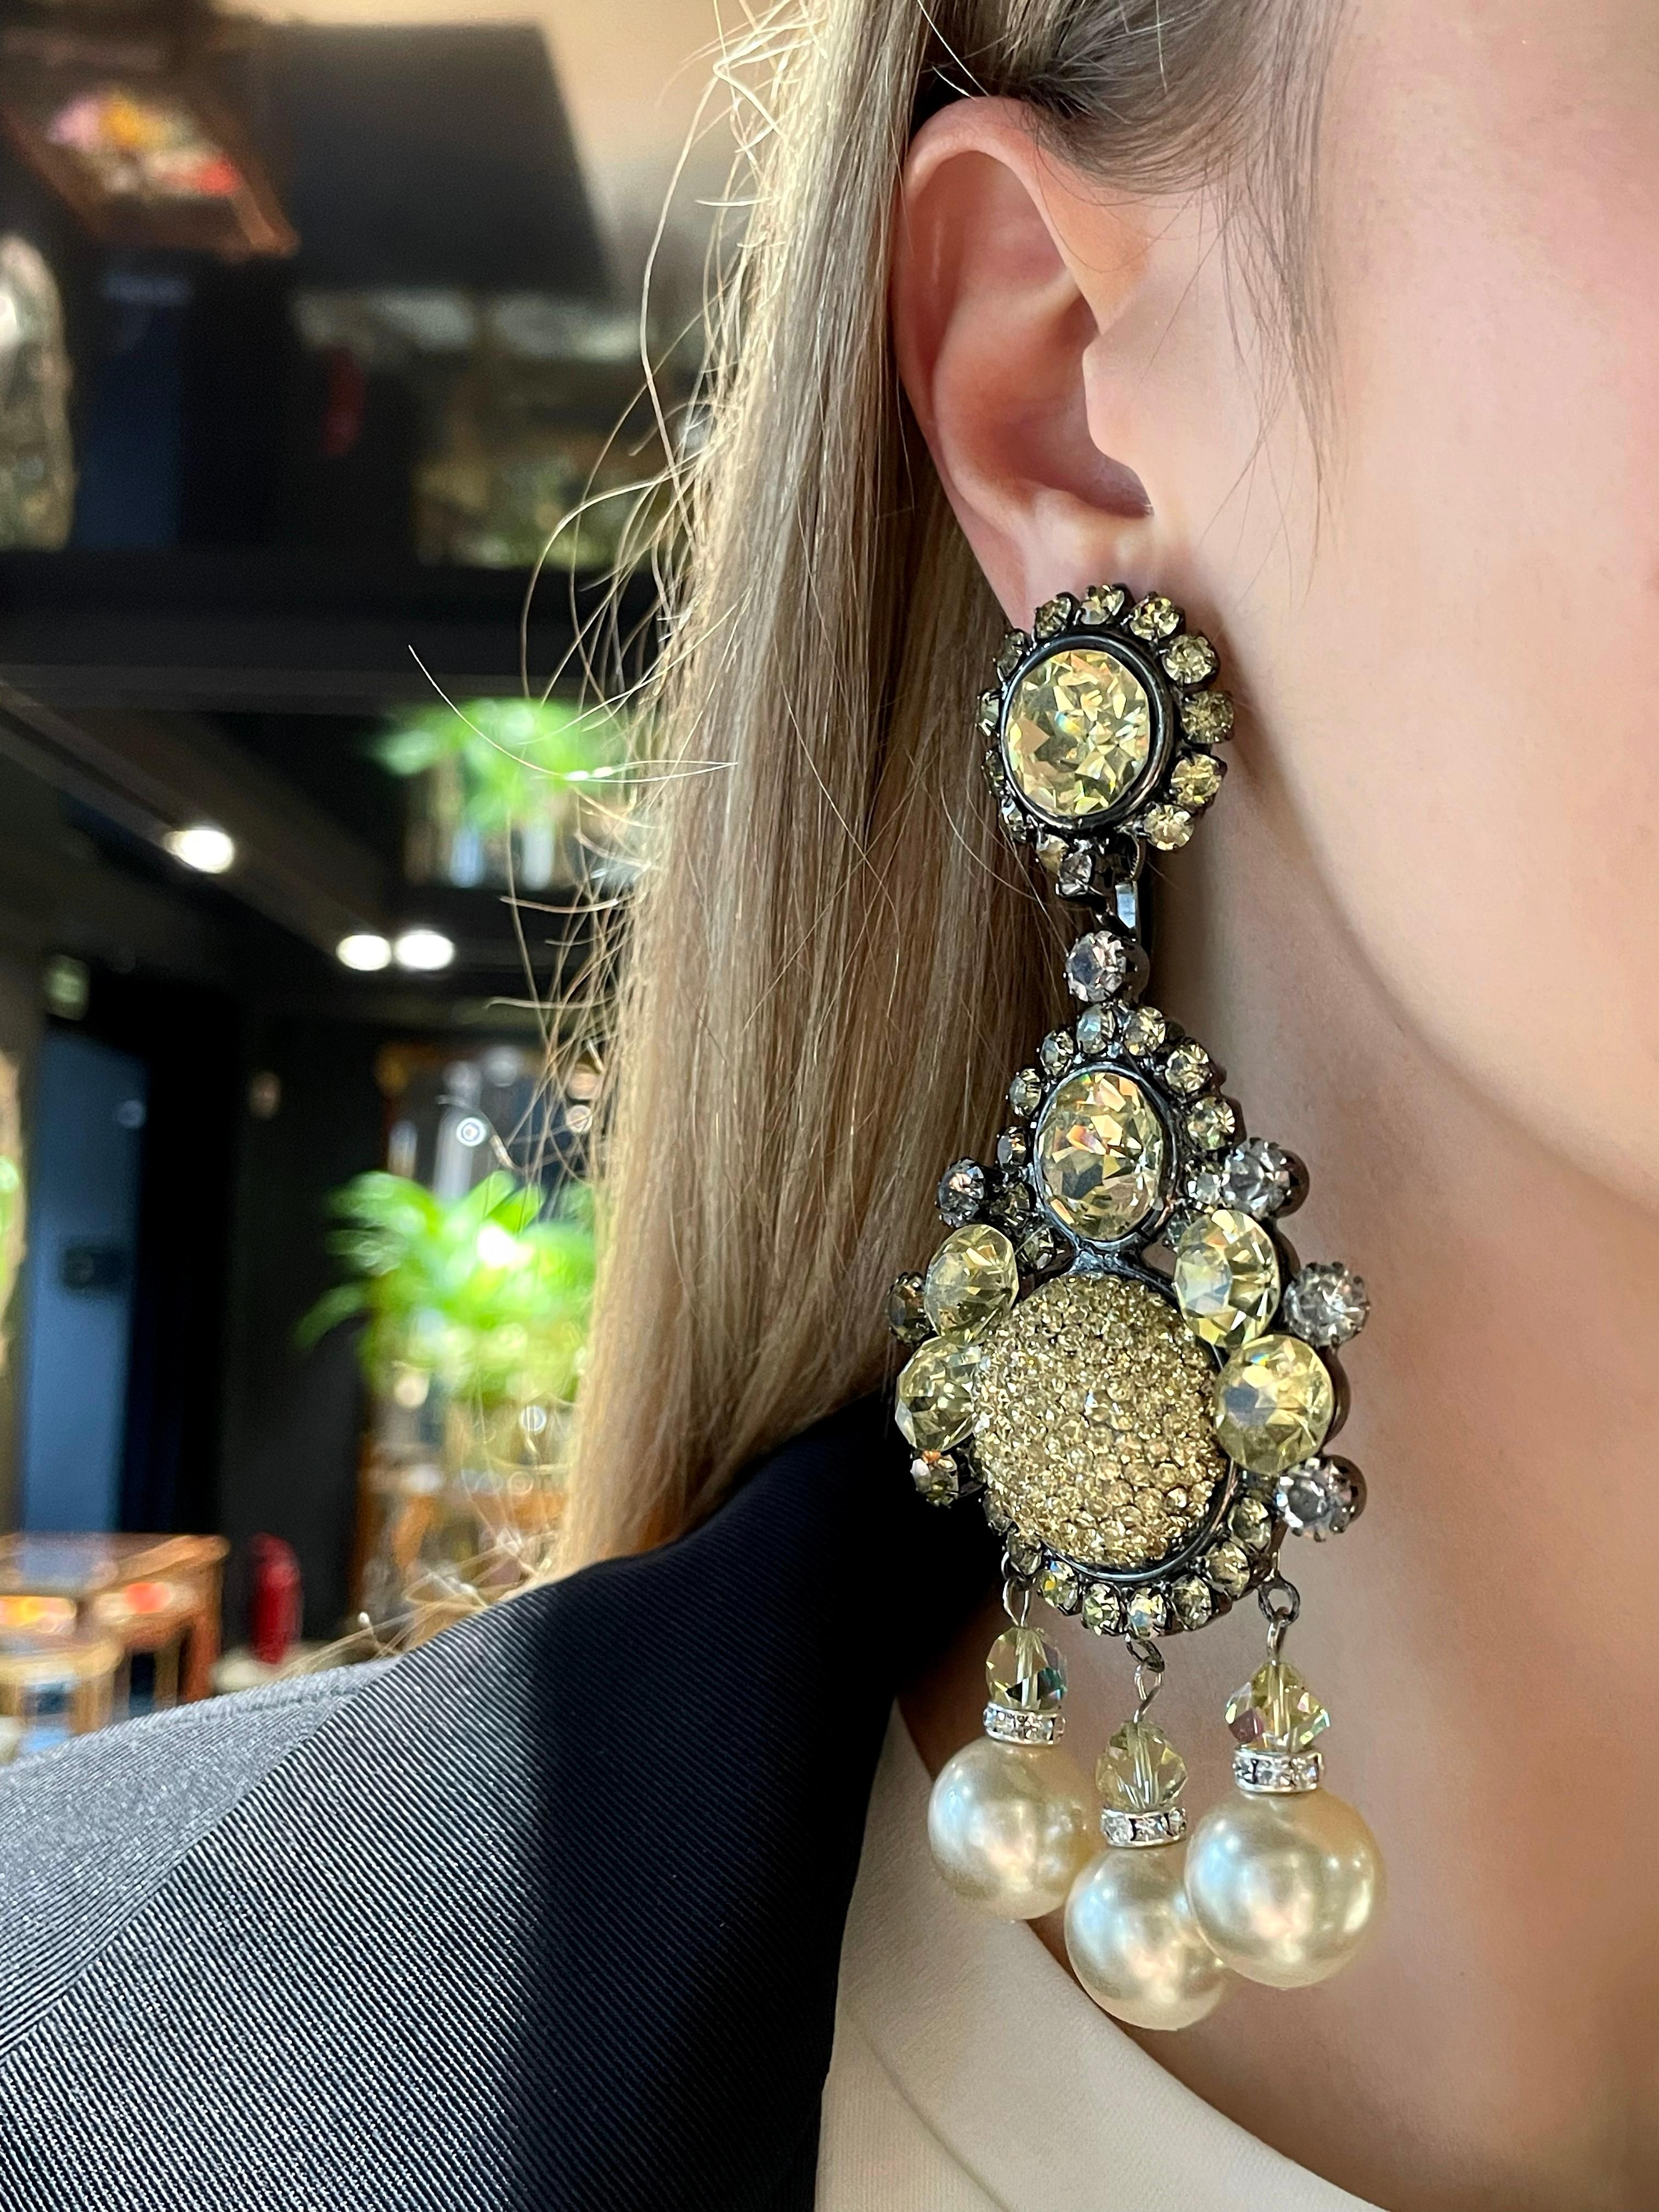 This is a pair of stunning massive clip on earrings designed by Lawrence VRBA in 1970s. The piece is crafted in base metal. It features shiny light green crystals and creamy faux pearls. 

Signed: “Lawrence VRBA”

Length: 12cm
Width (at max):